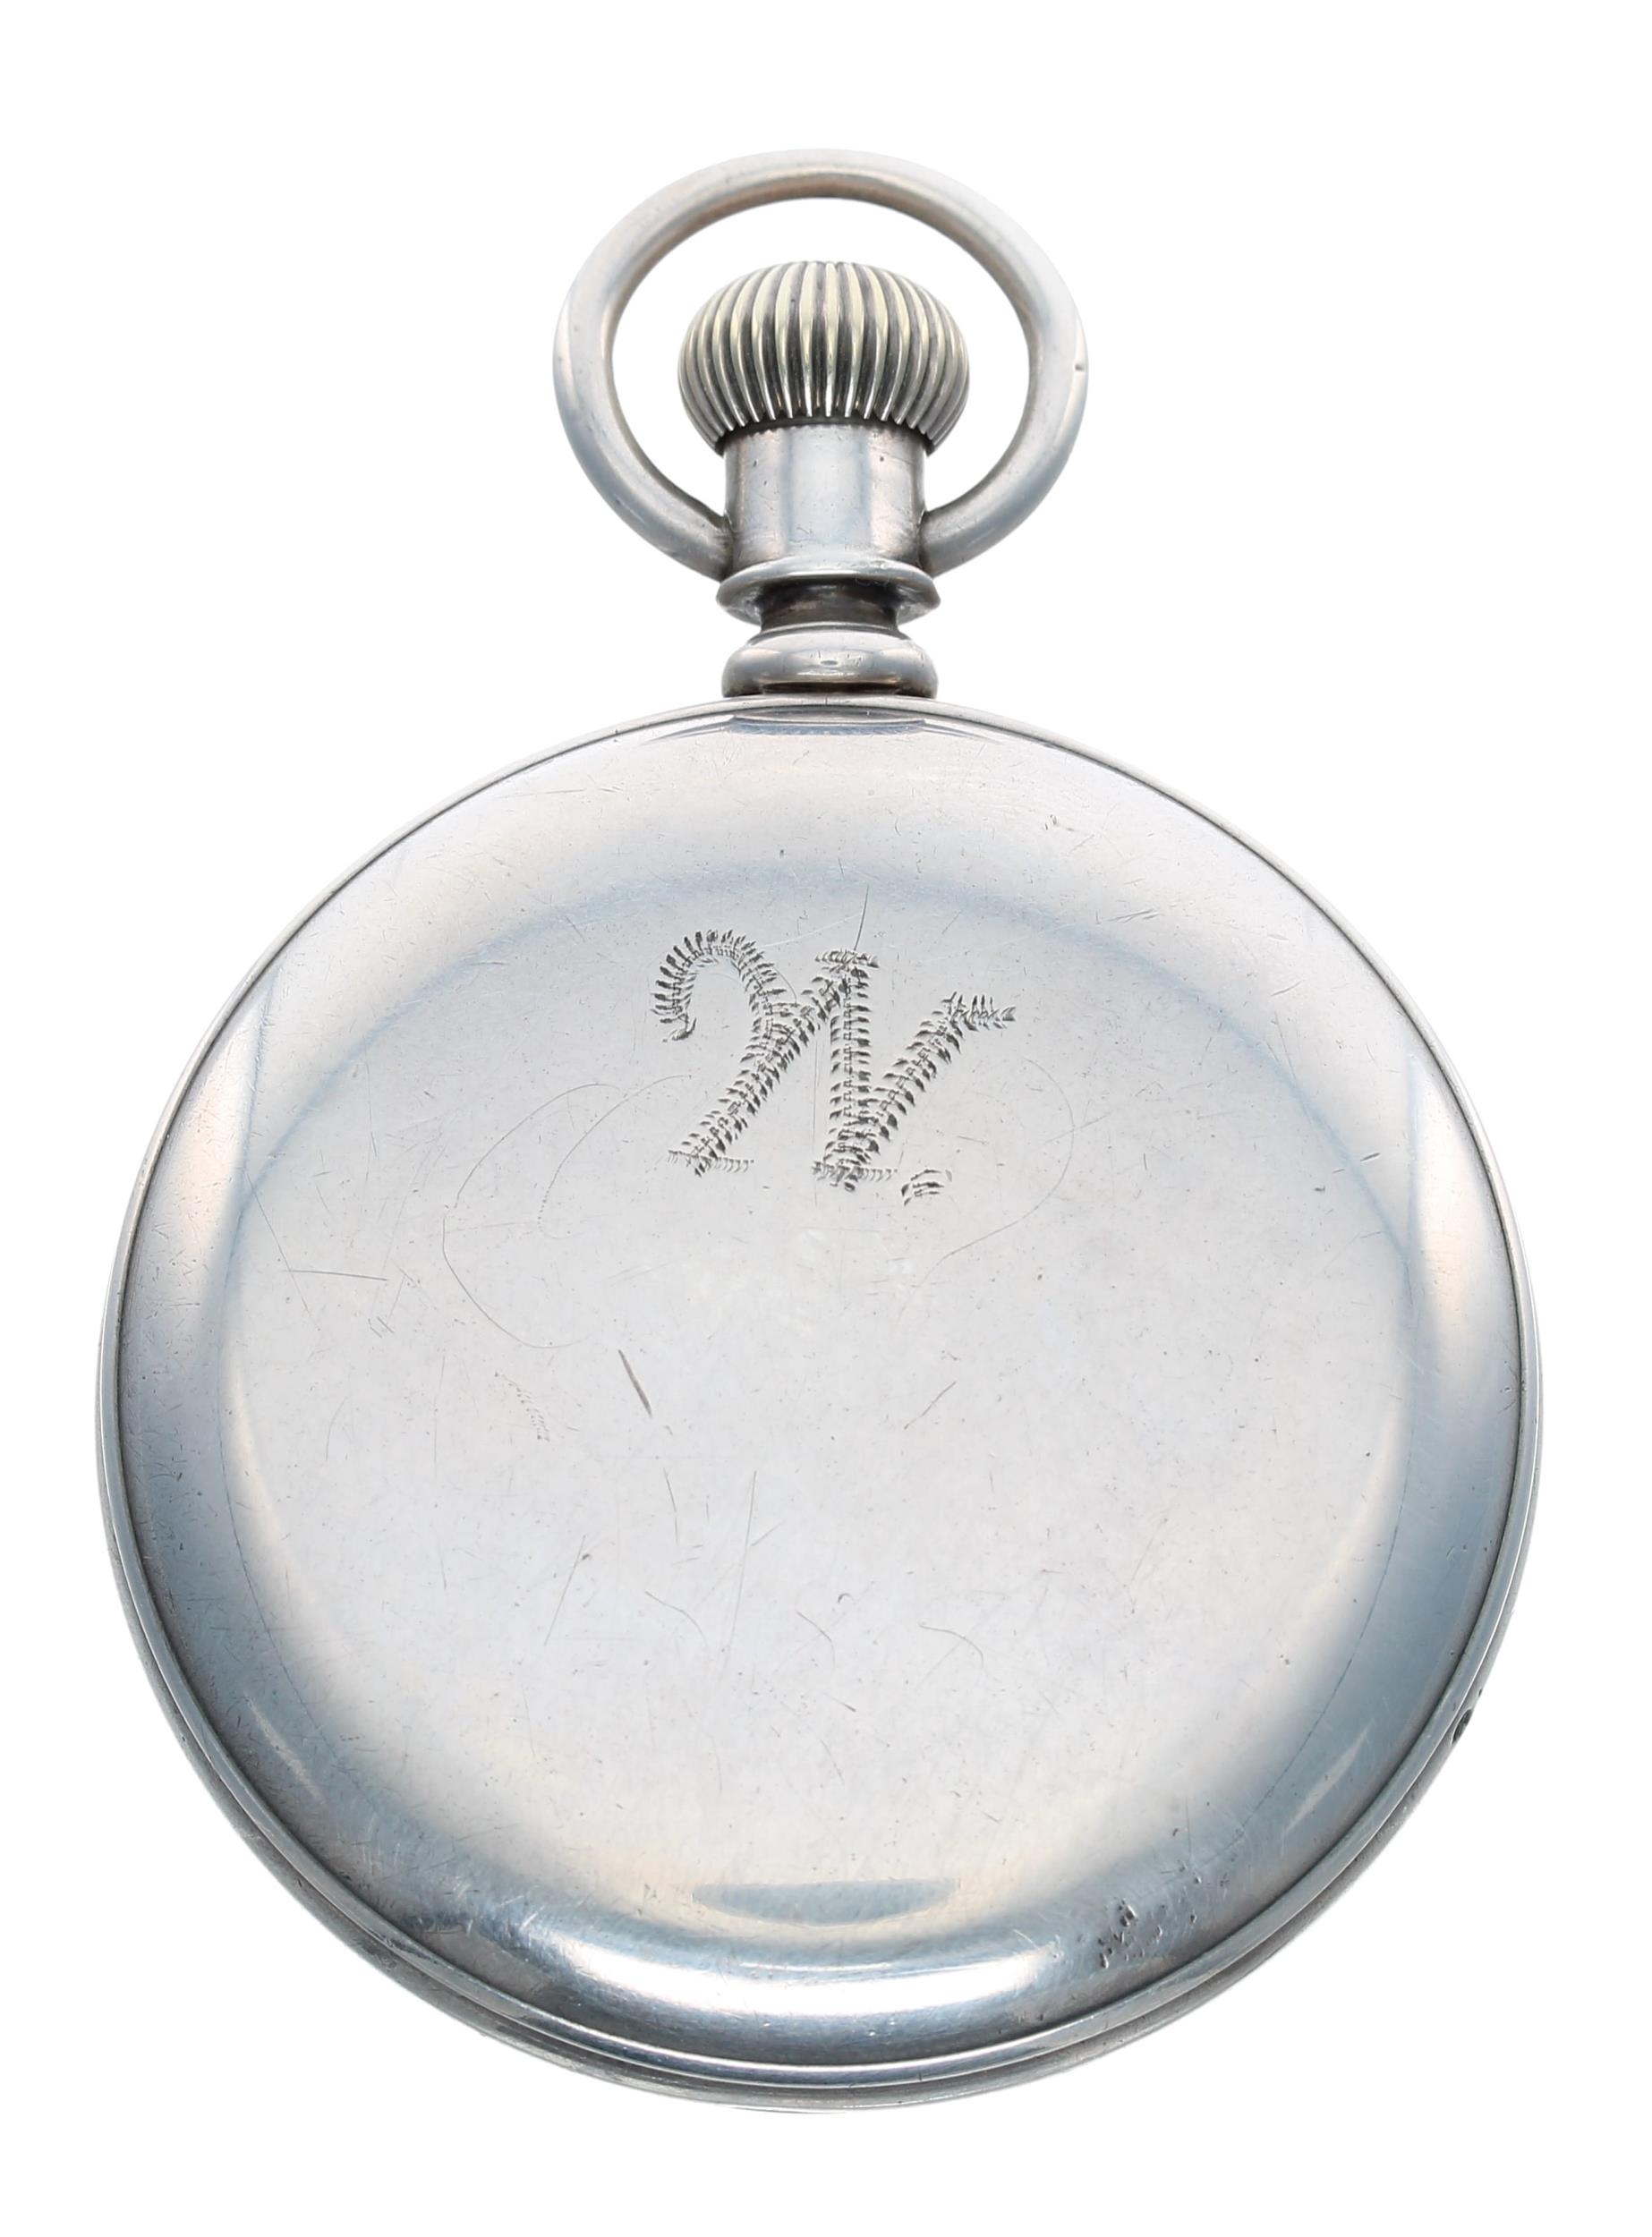 American Waltham nickel cased lever pocket watch, signed movement, no. 3893949, with safety - Image 3 of 3